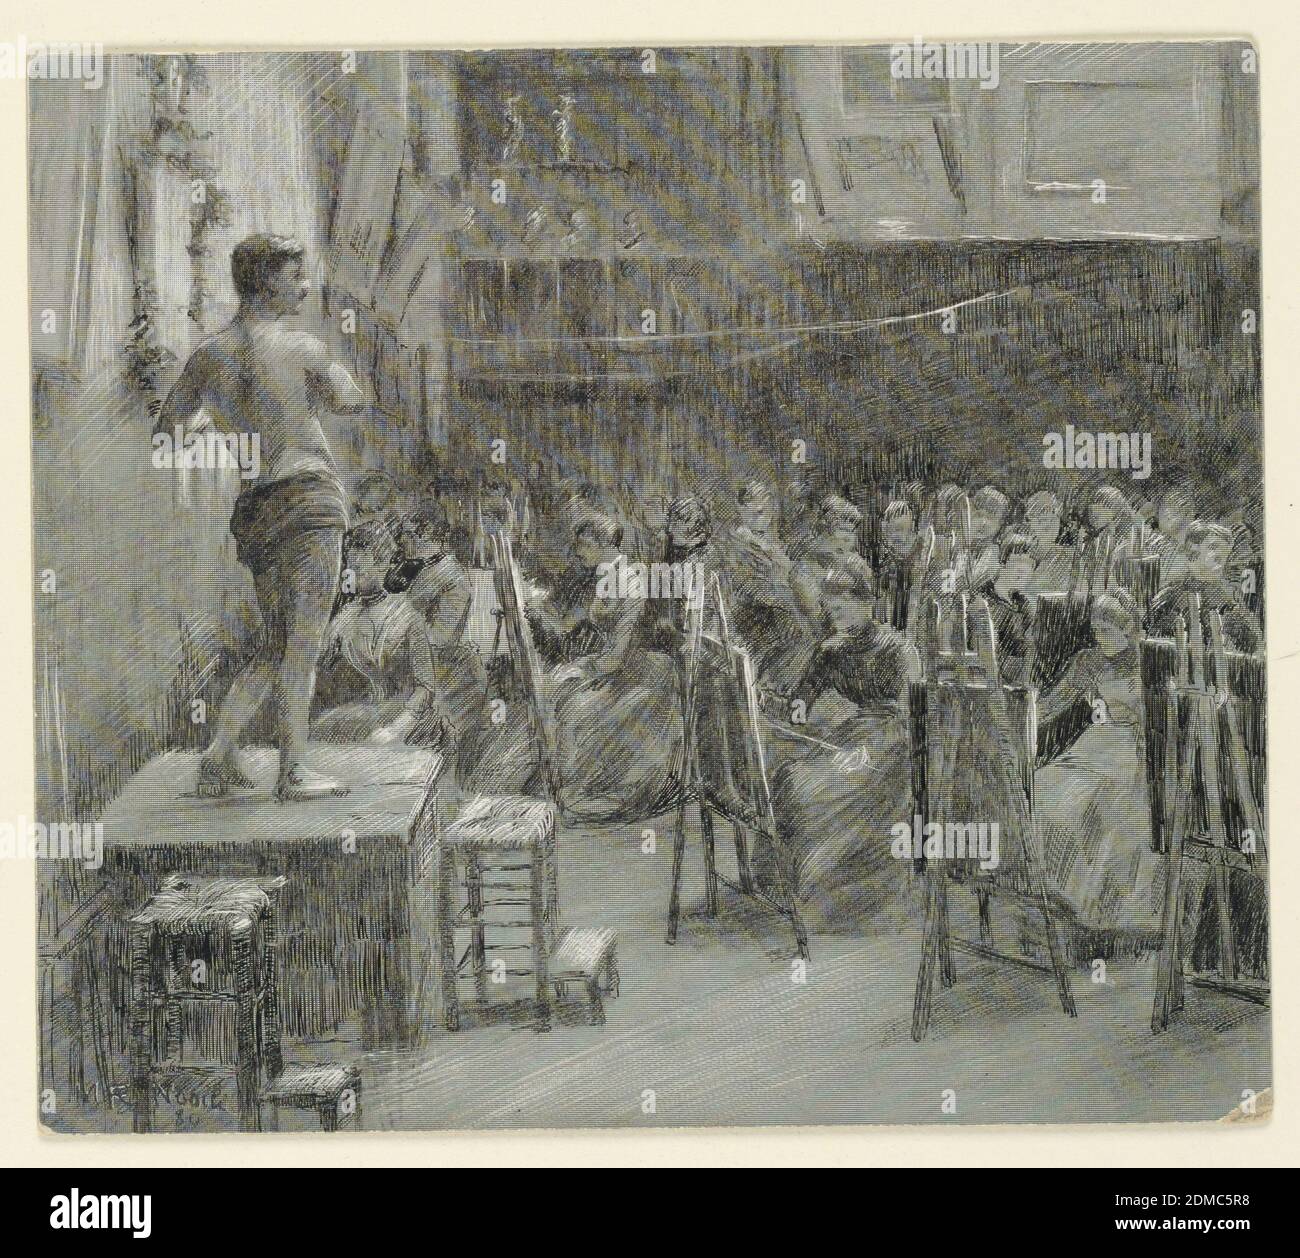 Atelier for Women (Bouguereau and Robert-Fleury), M. Riccardo Nobili, Italian, b. 1861, Black ink on prepared paper, Illustration on ruled paper for line-block reproduction, showing a class for women at the Académie Julian, Paris. Interior of a large studio, with a number of female students seated before their easels. A male model is posing on the platform, left., USA, 1880, figures, Drawing Stock Photo